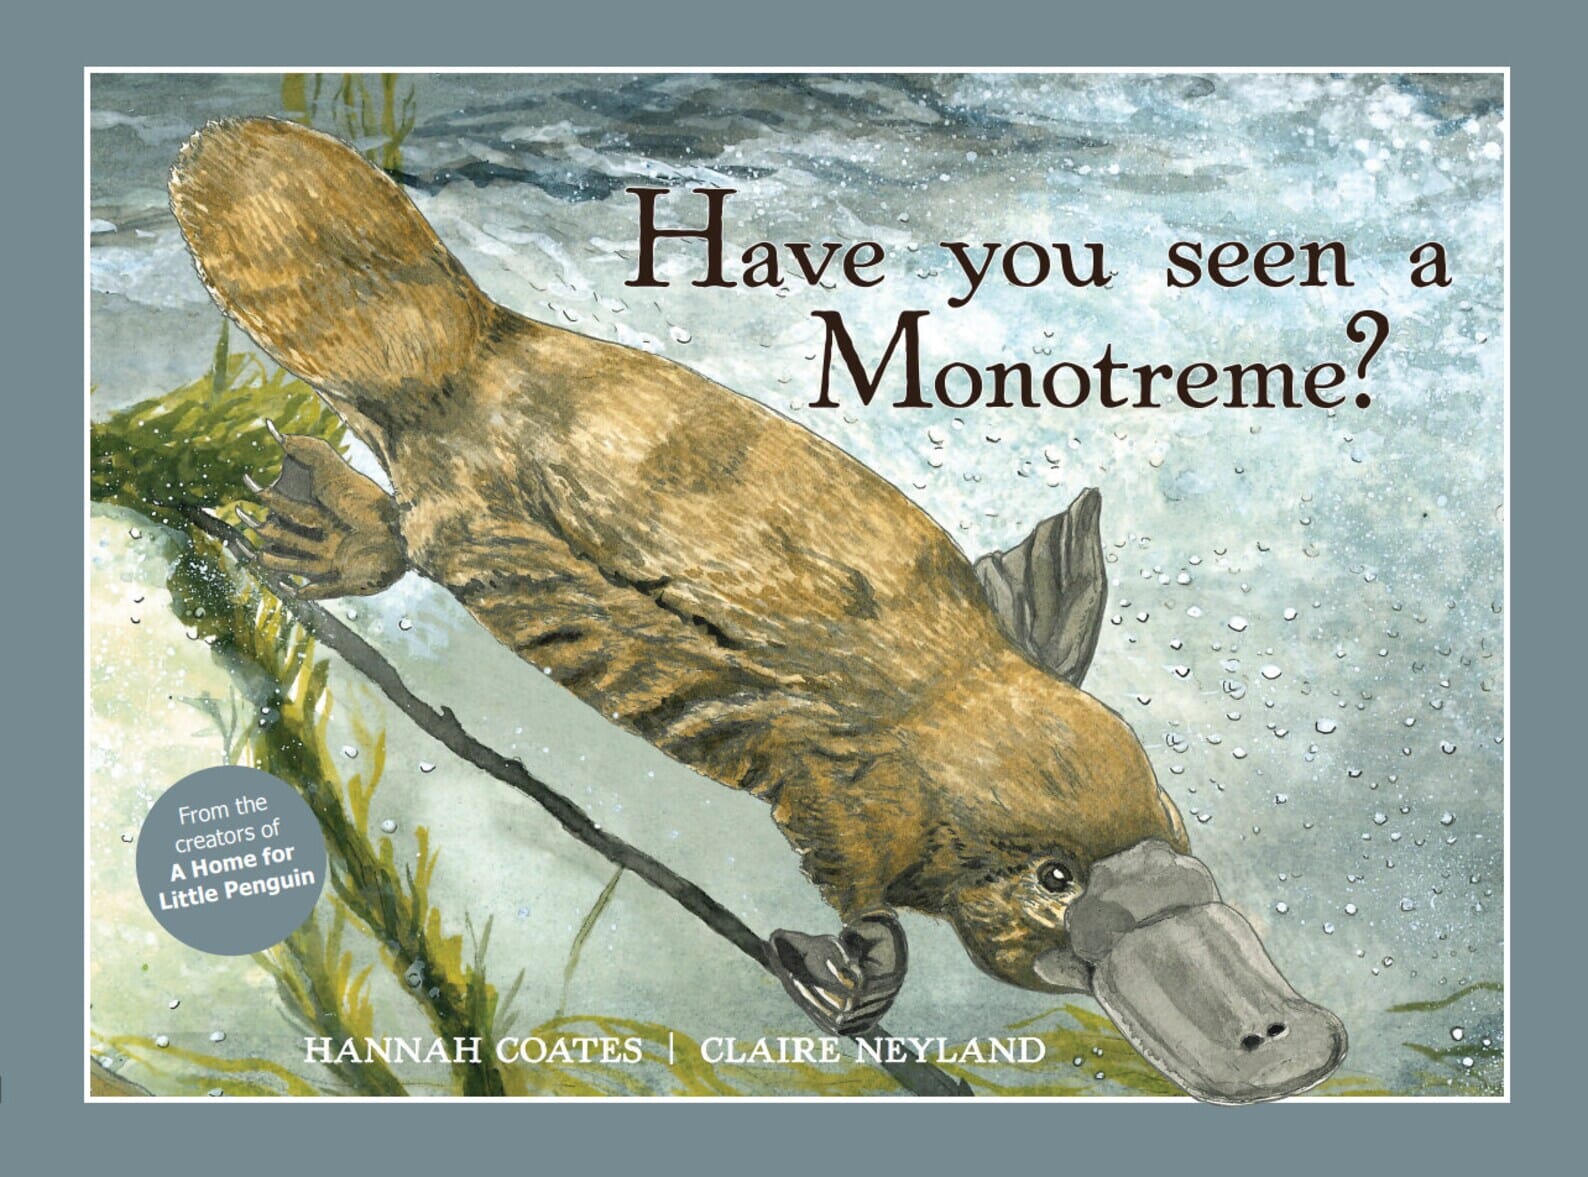 Have You Seen A Monotreme? - Book book Hannah Coates and Claire Neyland 